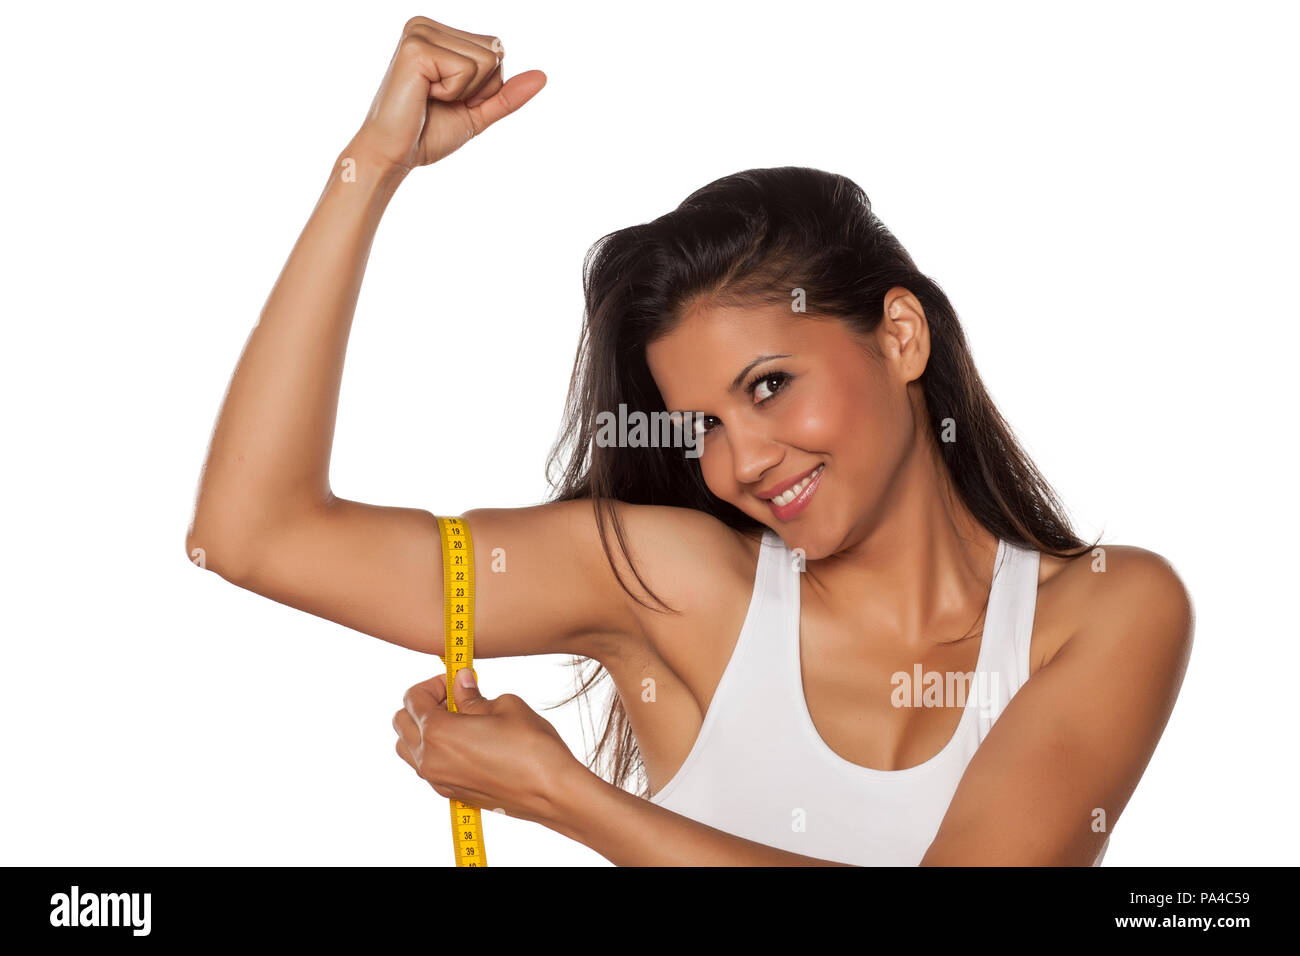 young beautiful woman measured her biceps with a tape measure Stock Photo